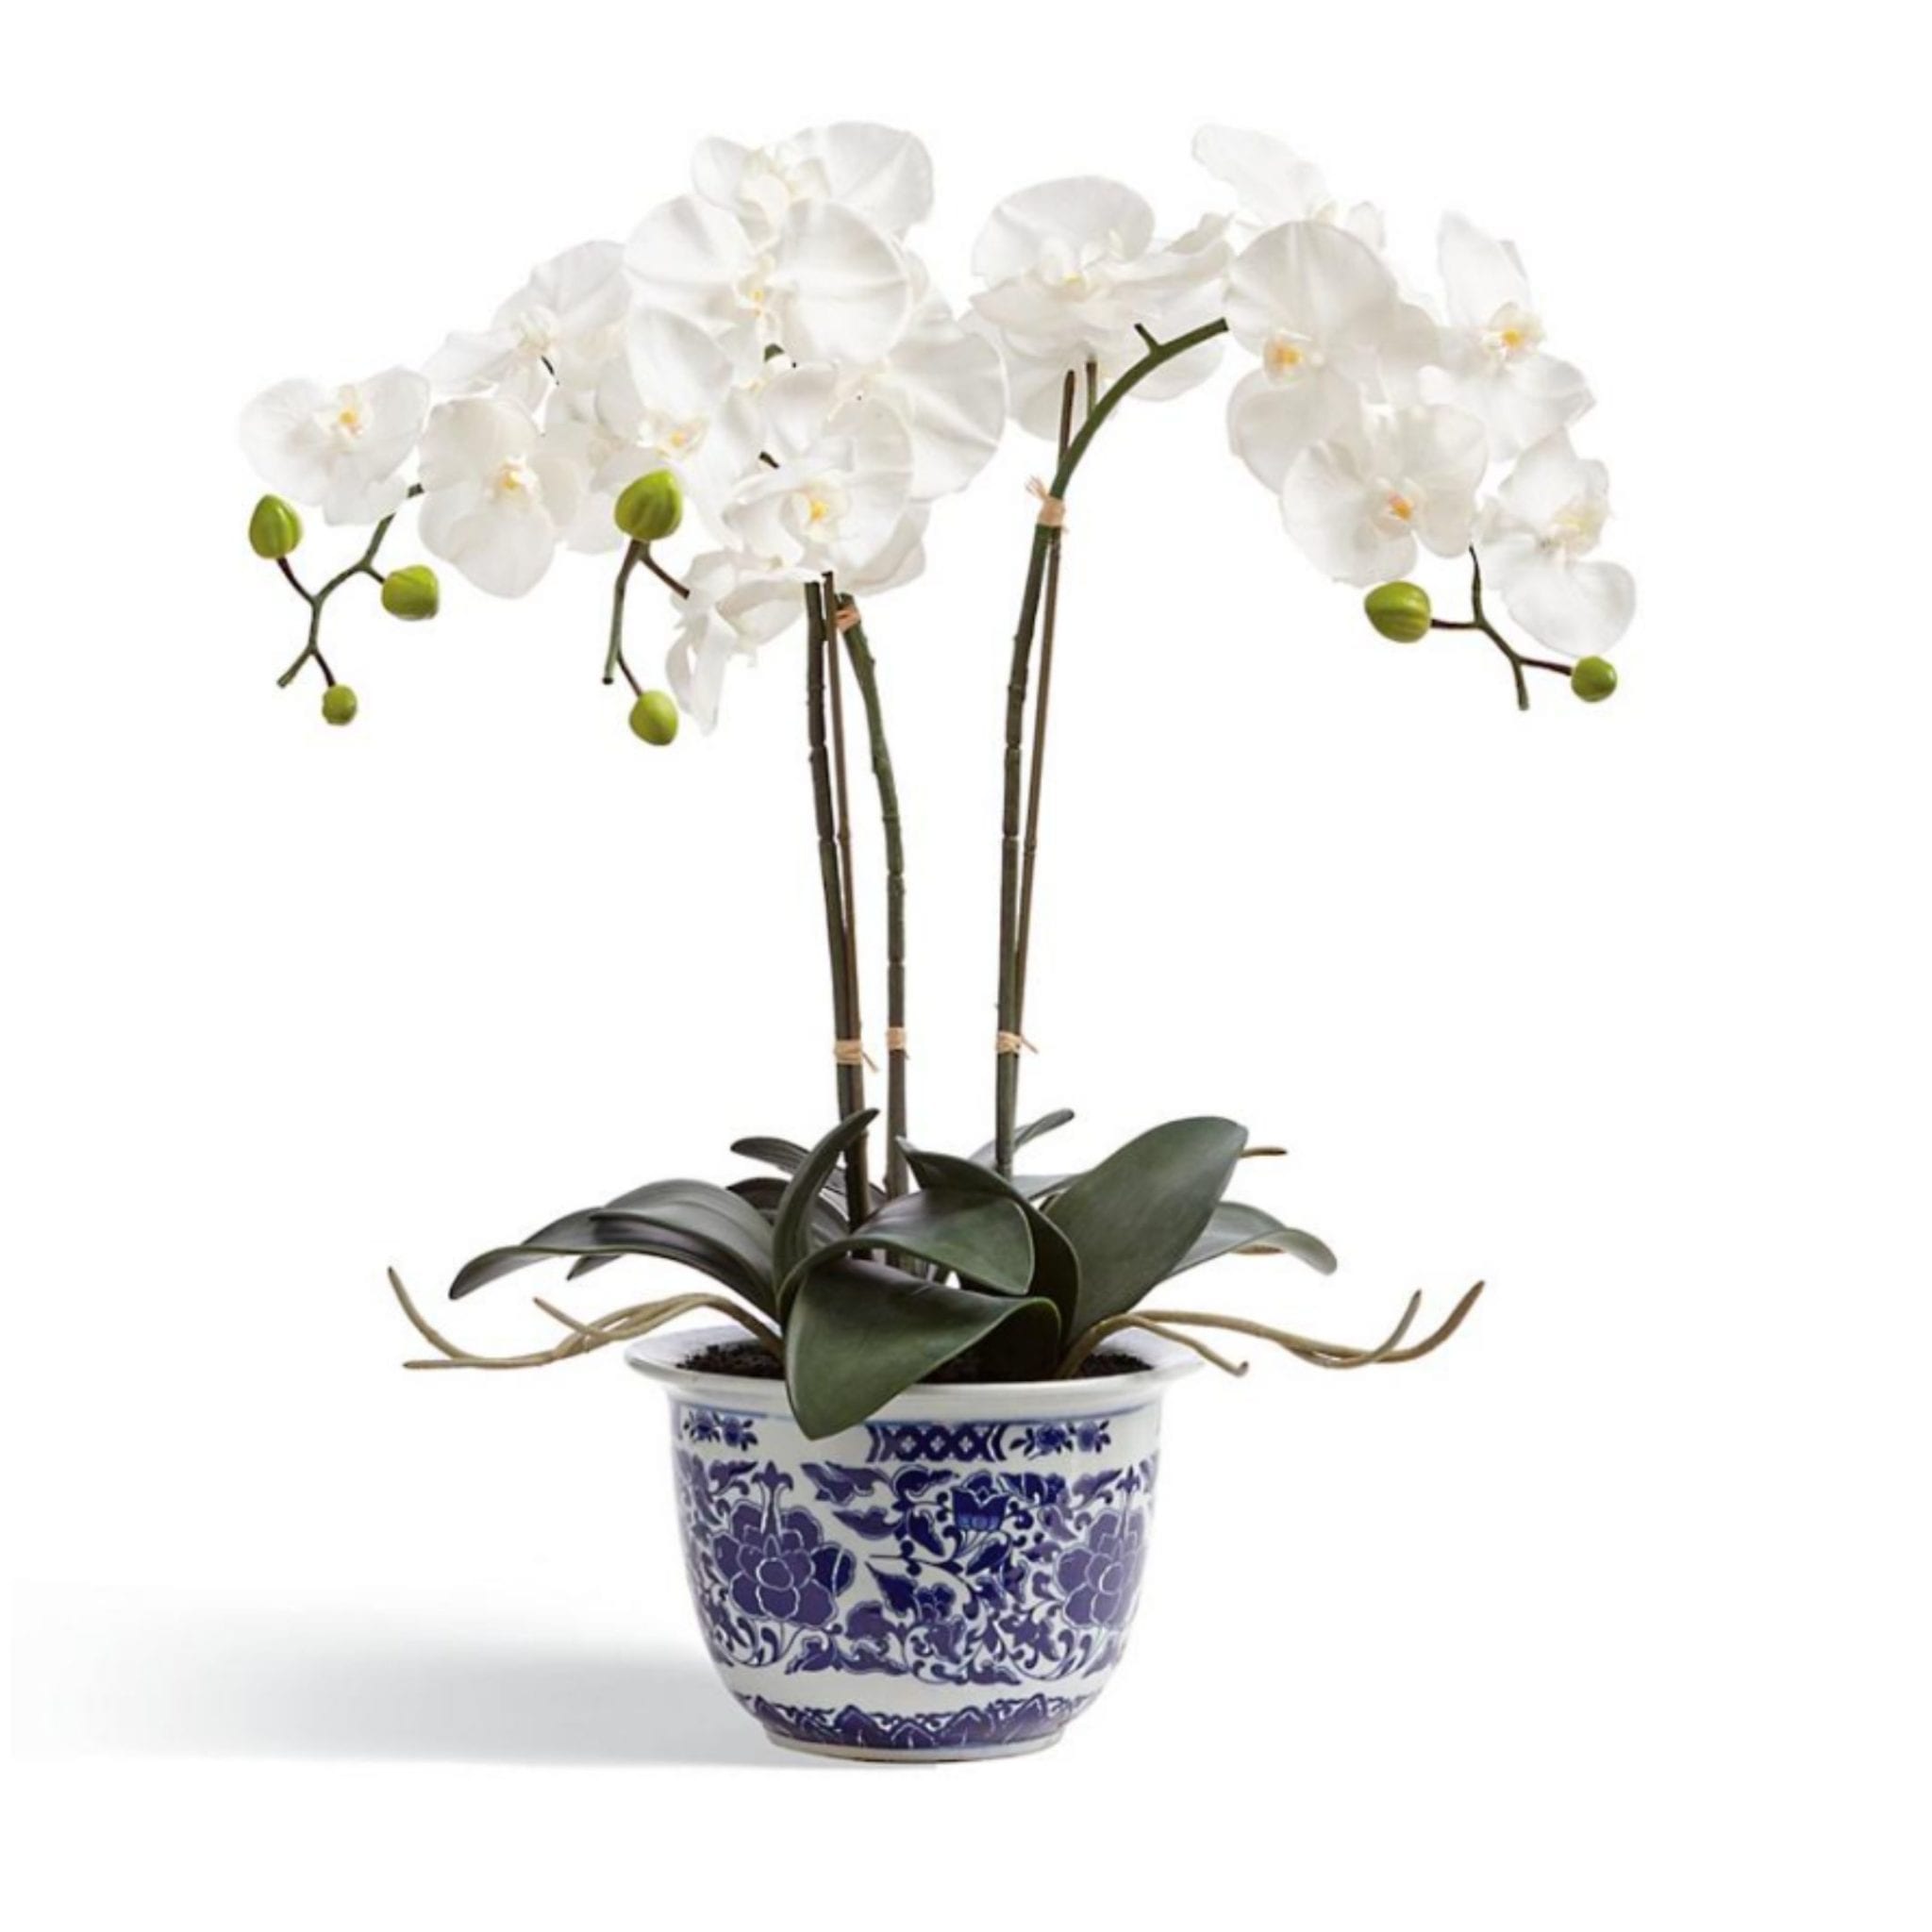 ZoomMove Back Through CarouselMove Forward Through CarouselROLLOVER IMAGE TO ZOOM Orchid Potted Plant in Ming Vessel